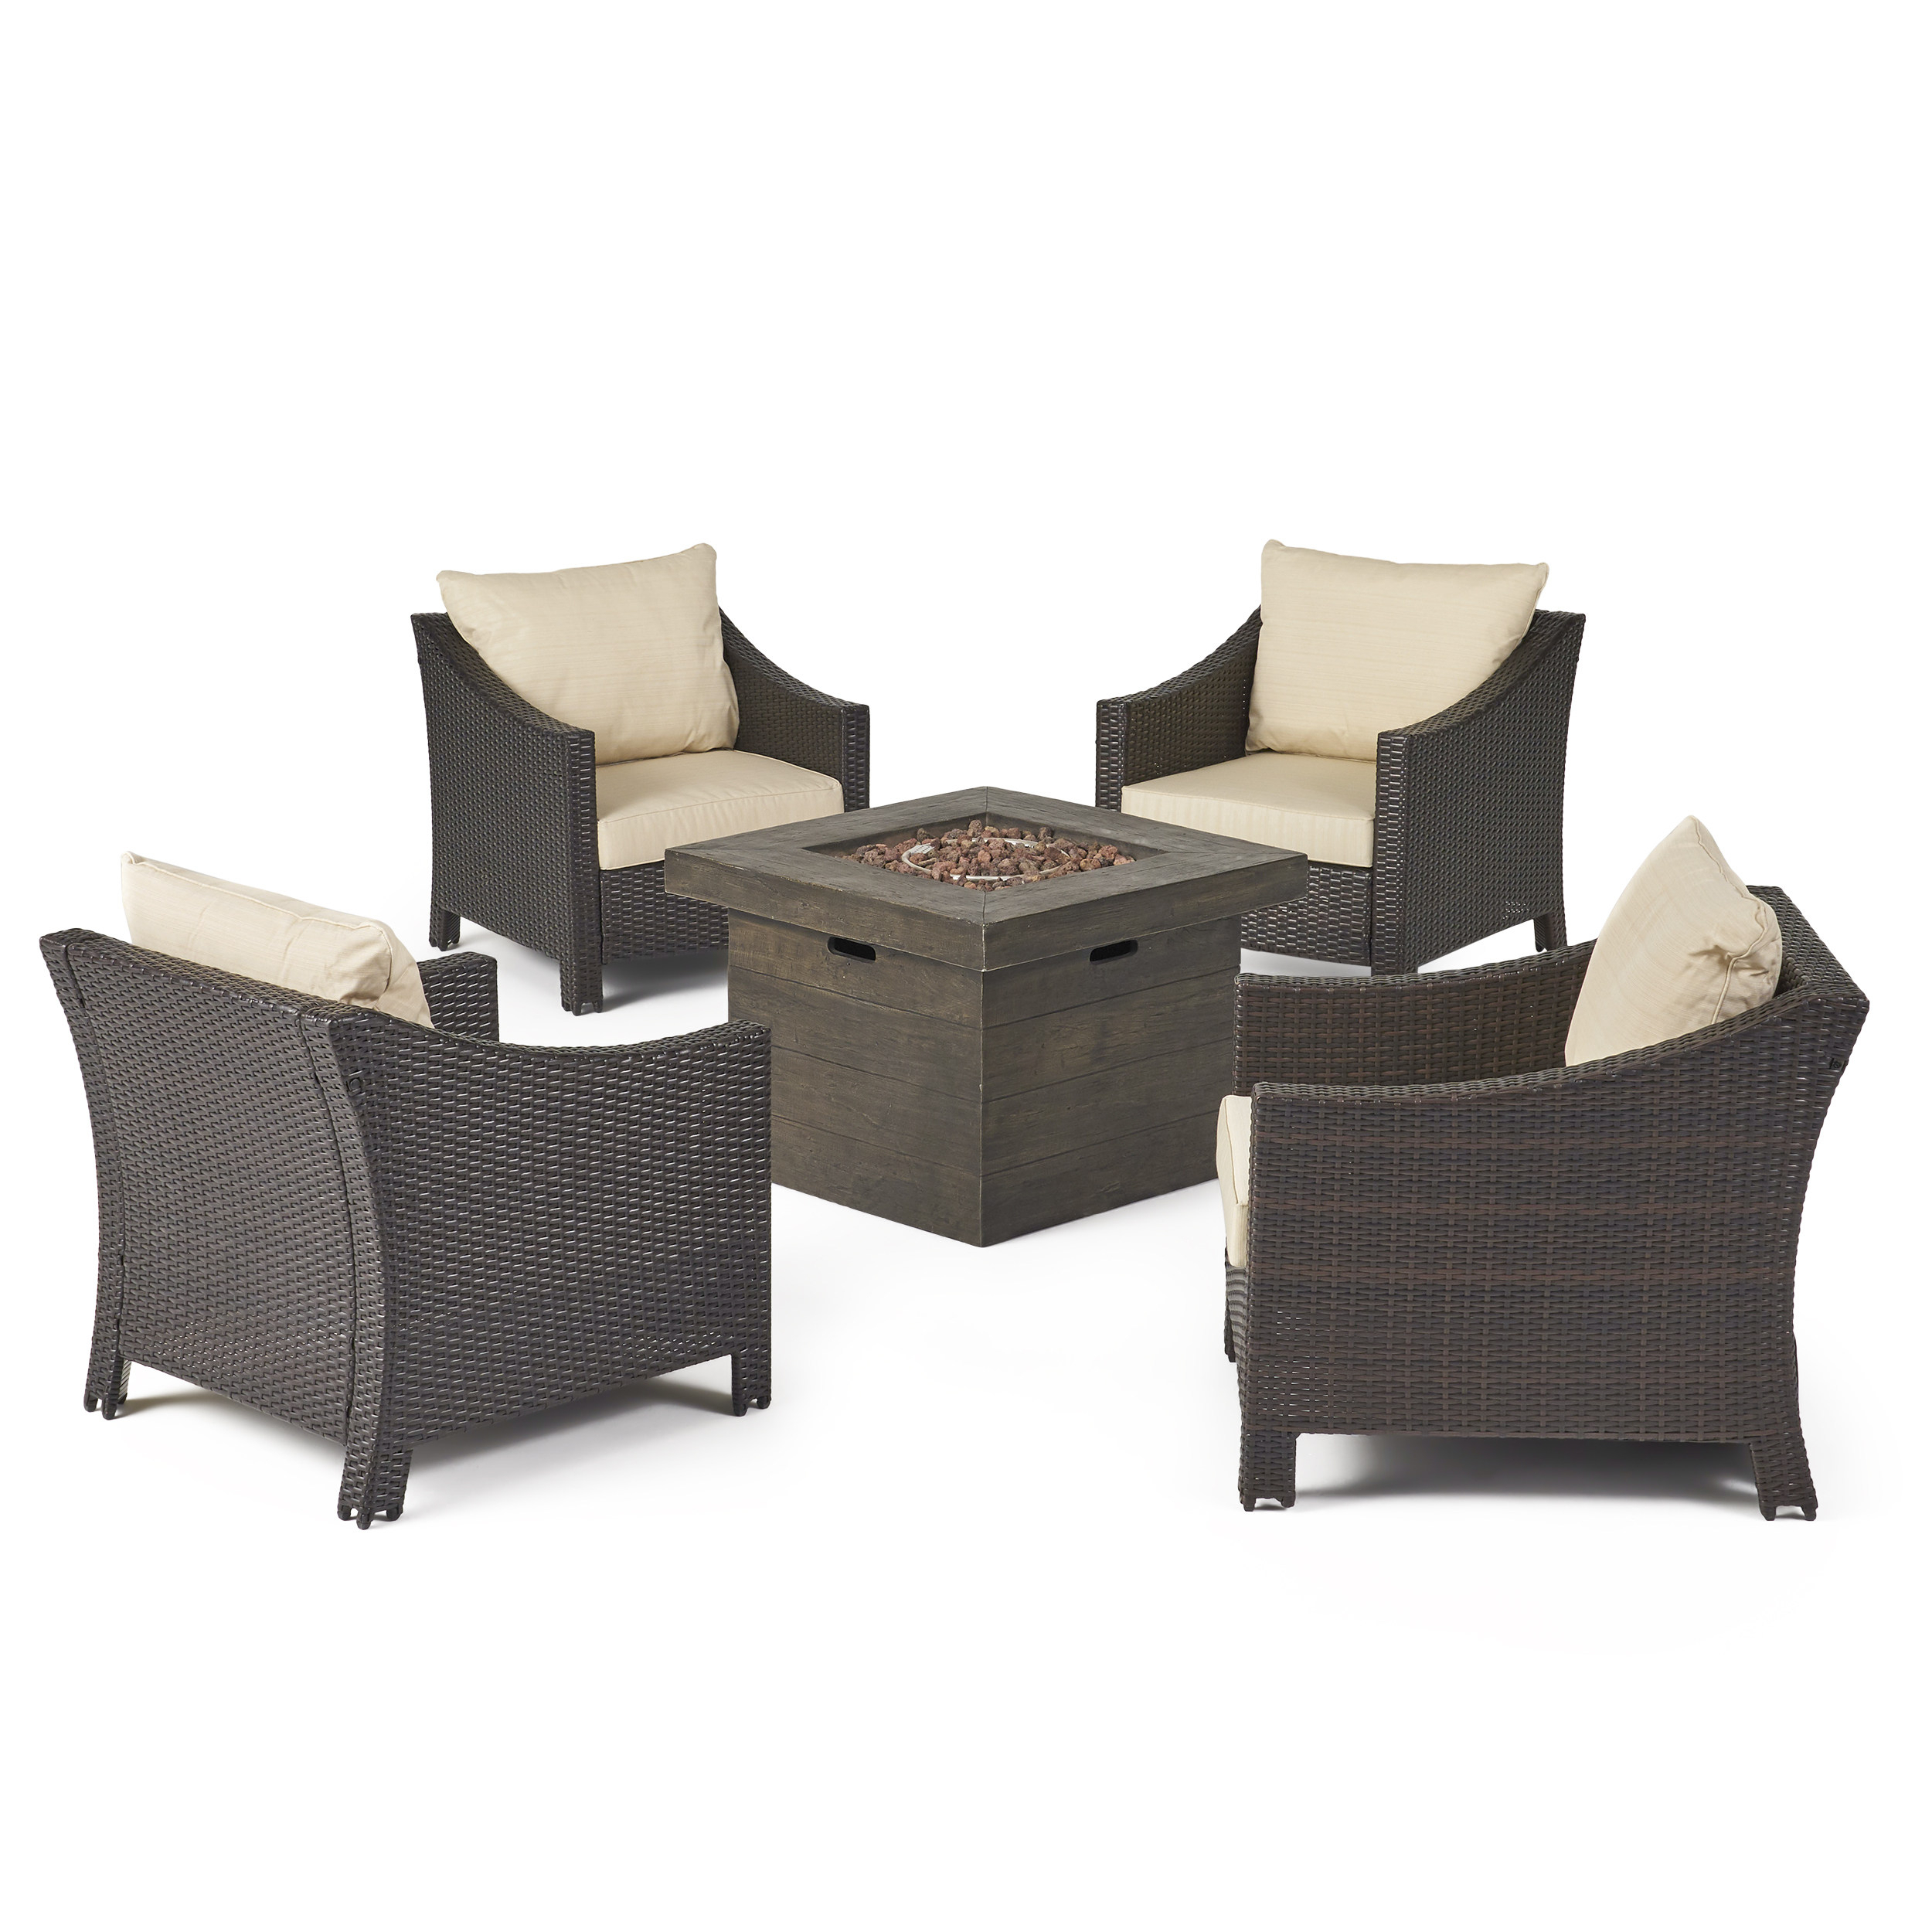 Andrew Outdoor 5 Piece Wicker Water Resistant Cushion Chat Set With Fire Pit - Beige